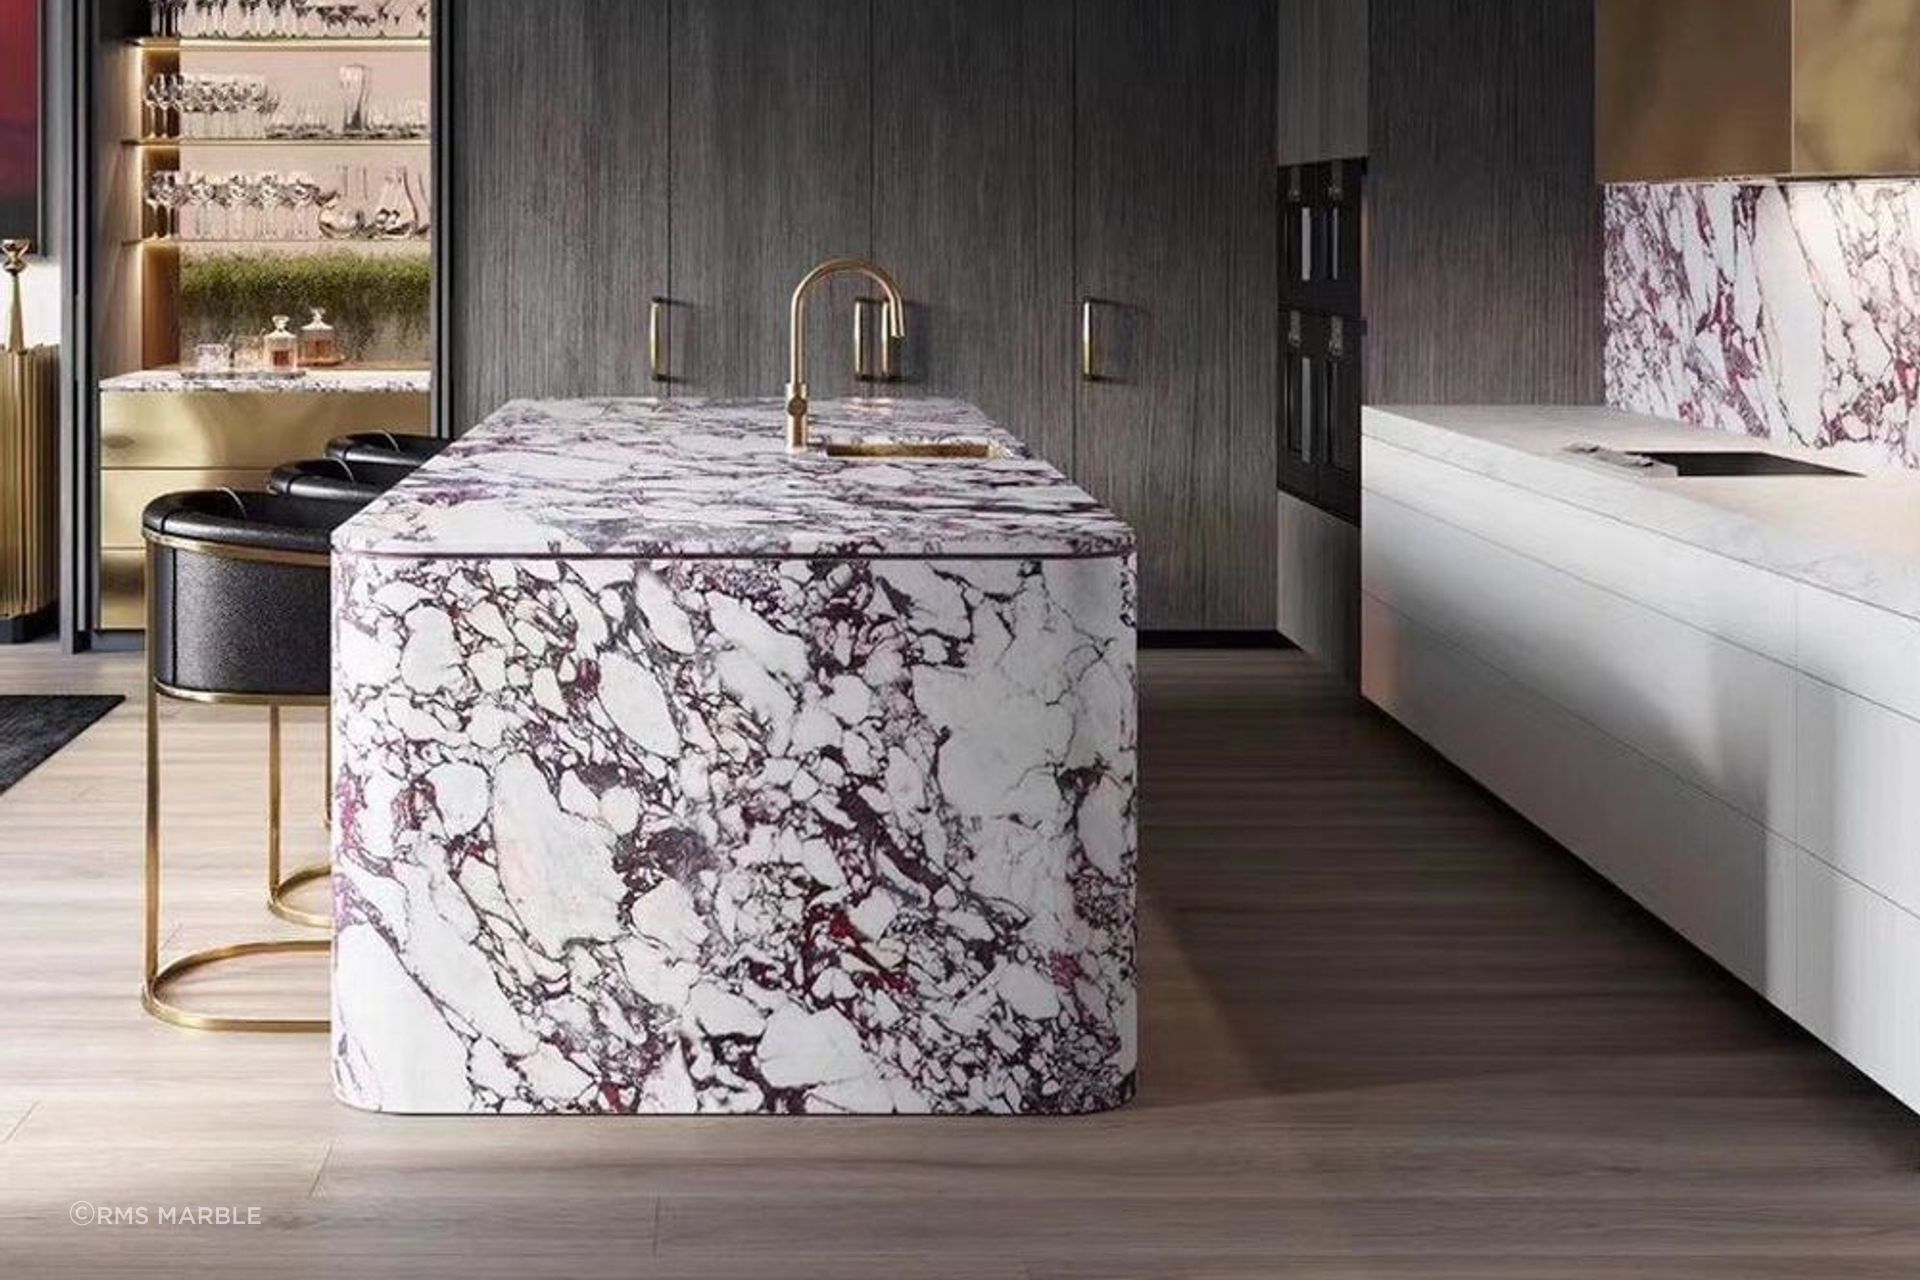 Marble surfaces showcase the beauty of the raw material